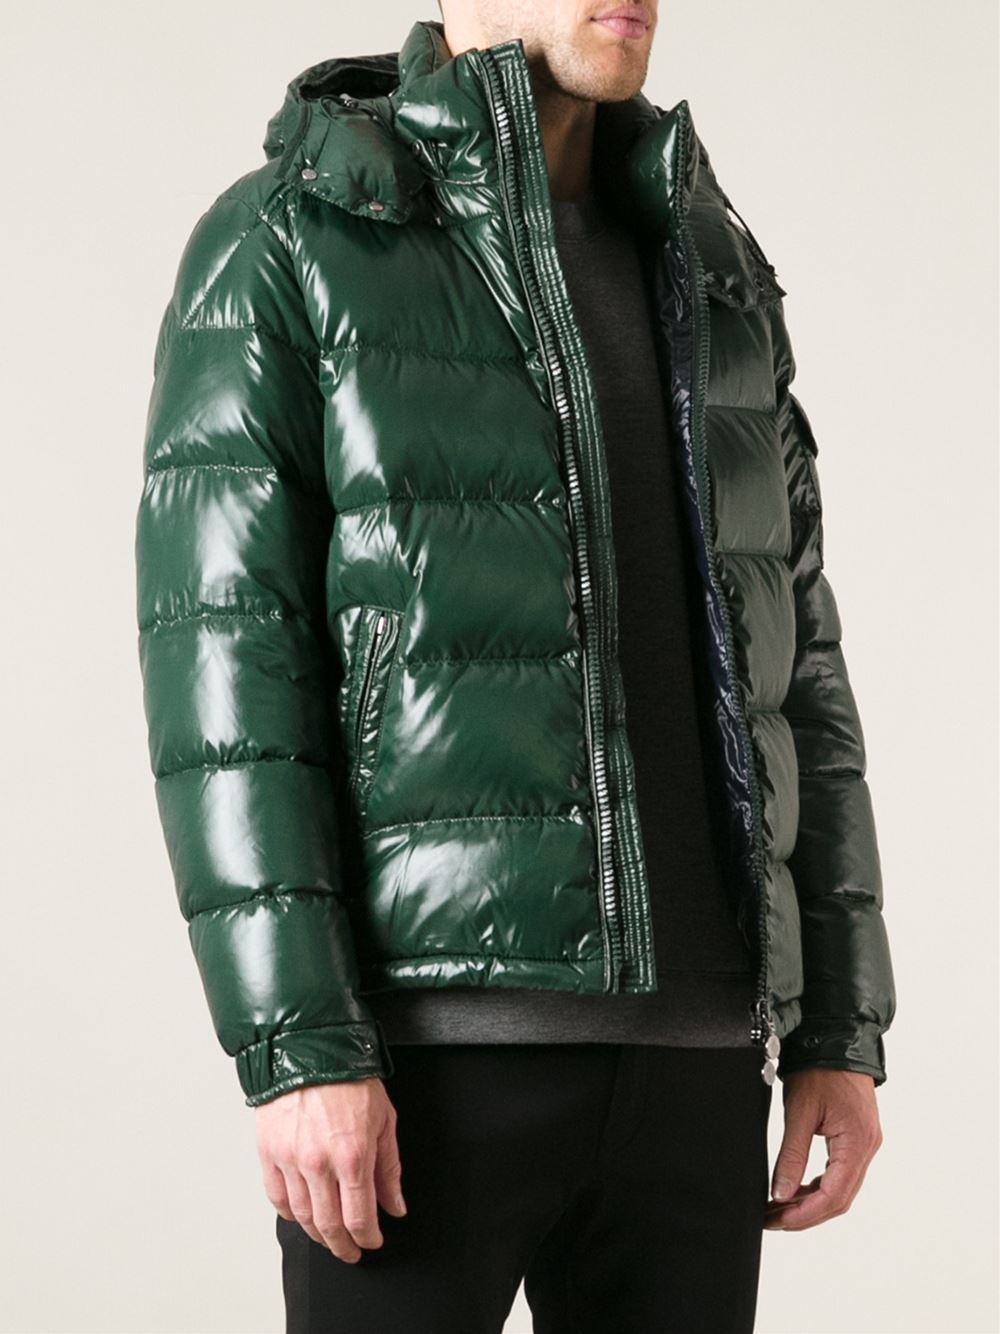 Moncler Maya Lacquered Jacket in Green for Men - Lyst